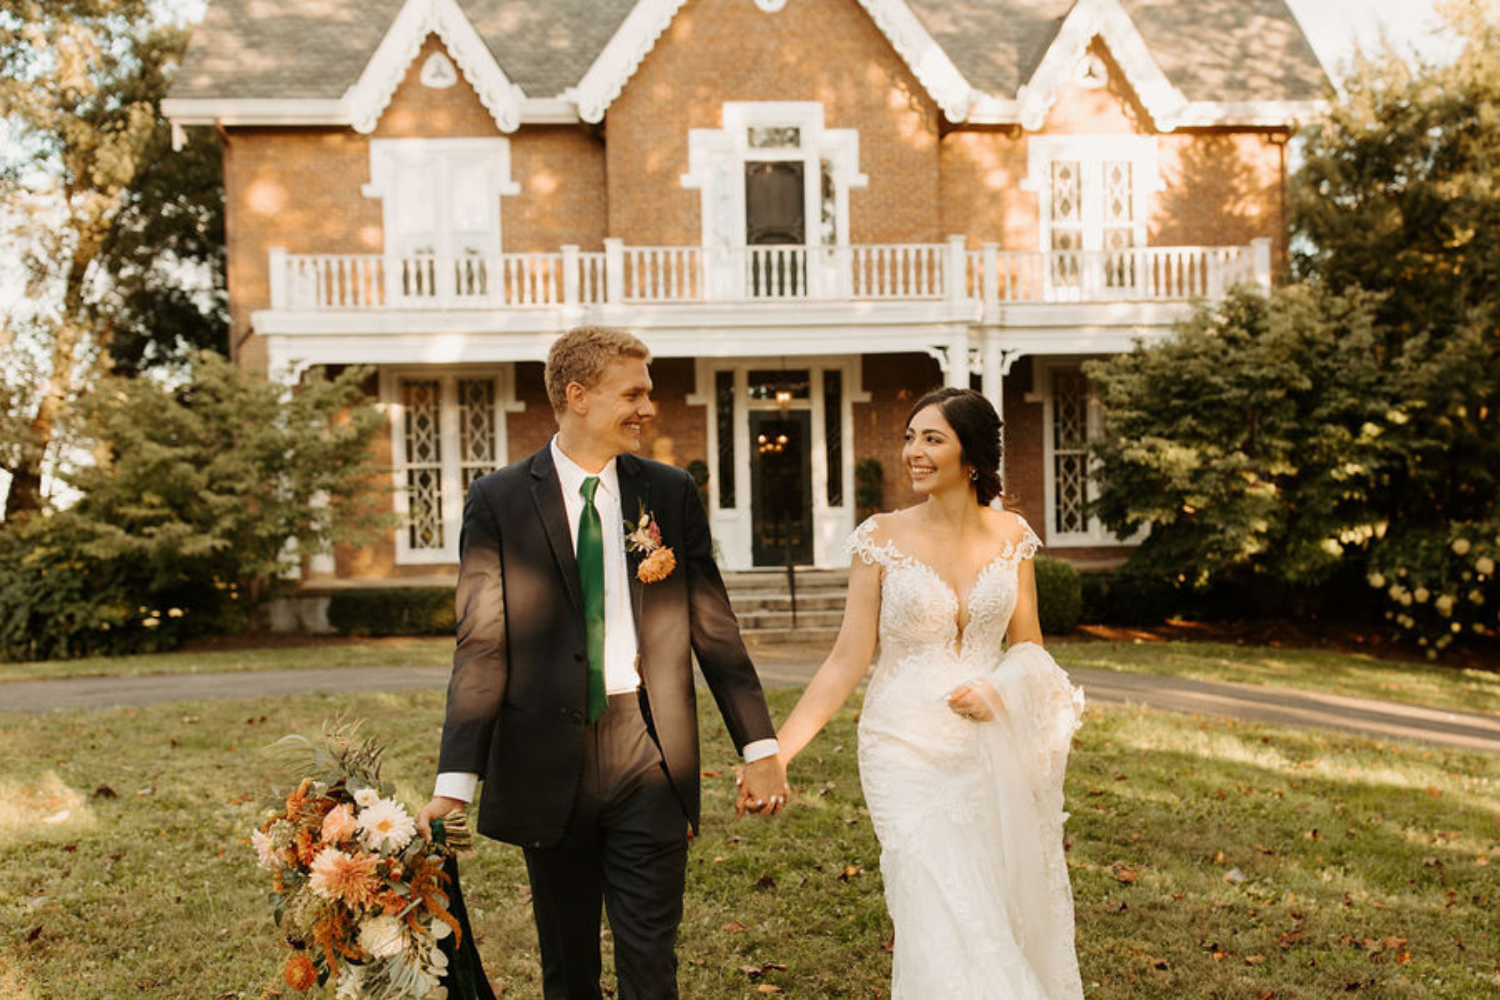 Prepare for engagement season as a wedding venue - Manor House Consulting